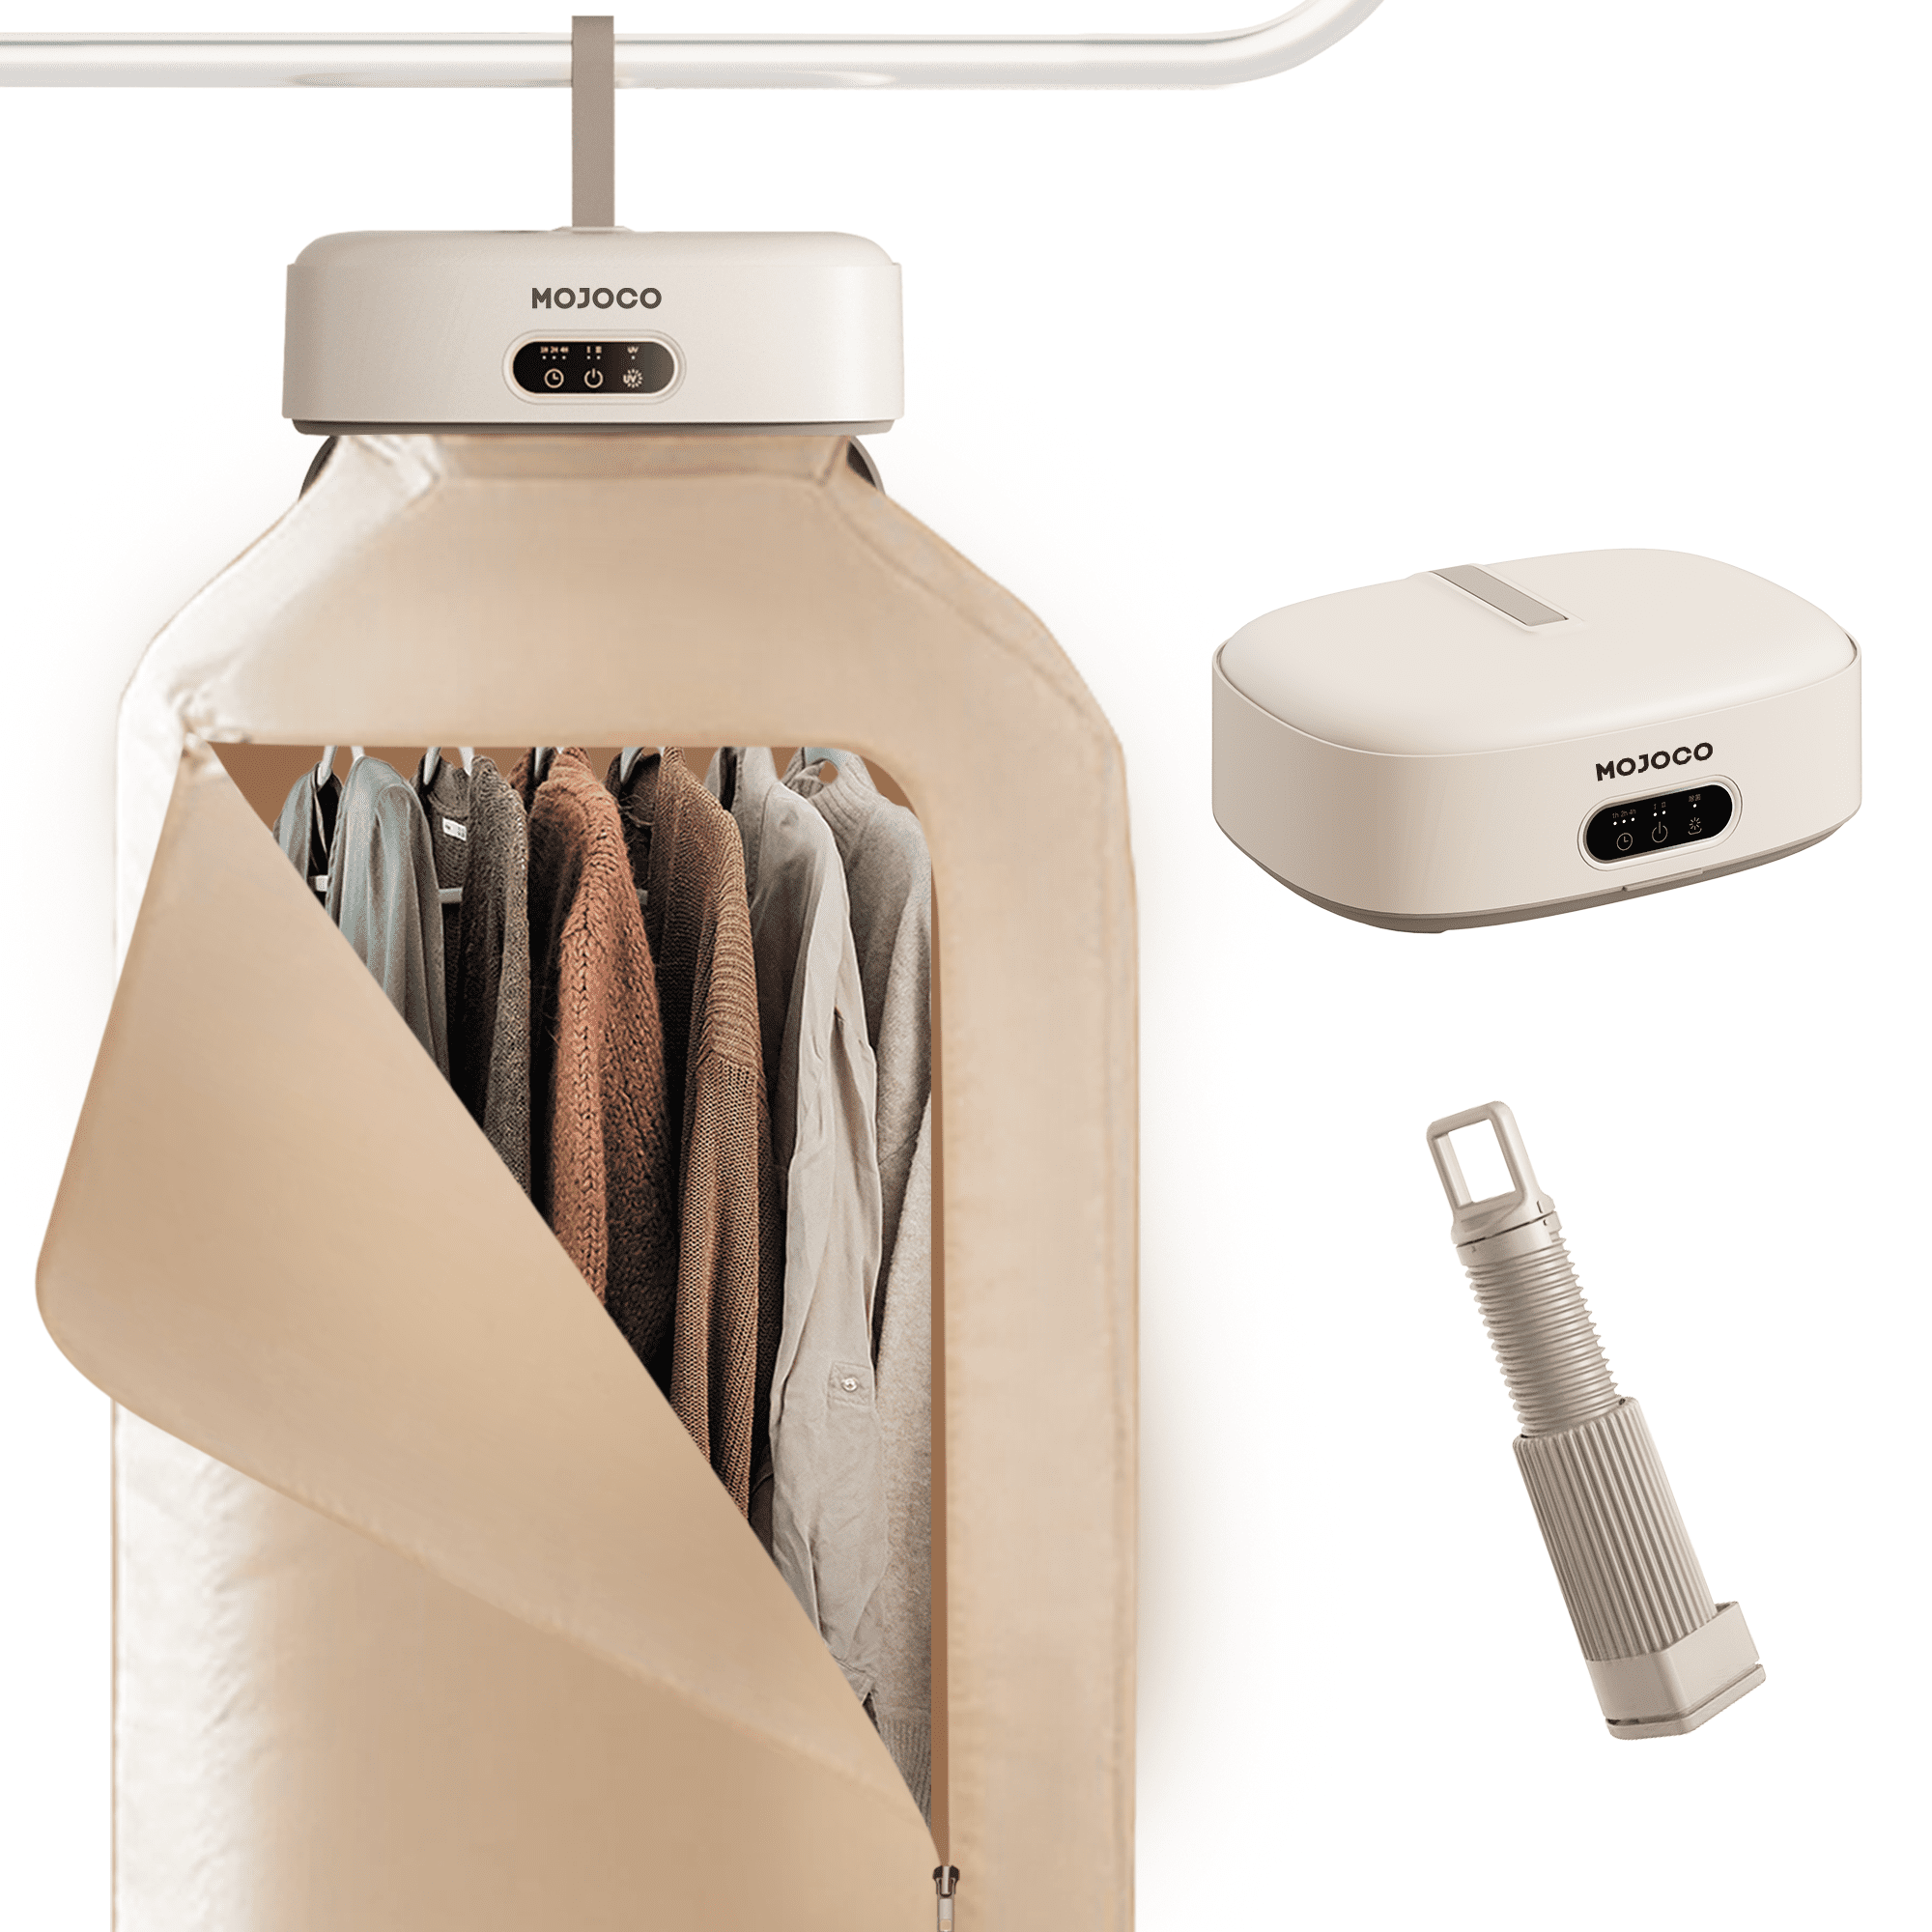 Mojoco Electric Portable Clothes Dryer - 600W Mini Clothes Dryer for  Apartment, Dorm, RV - Quick and Easy to Use Mini Portable Dryer Machine  with Dryer Bag for Light Clothes, Underwear, Baby